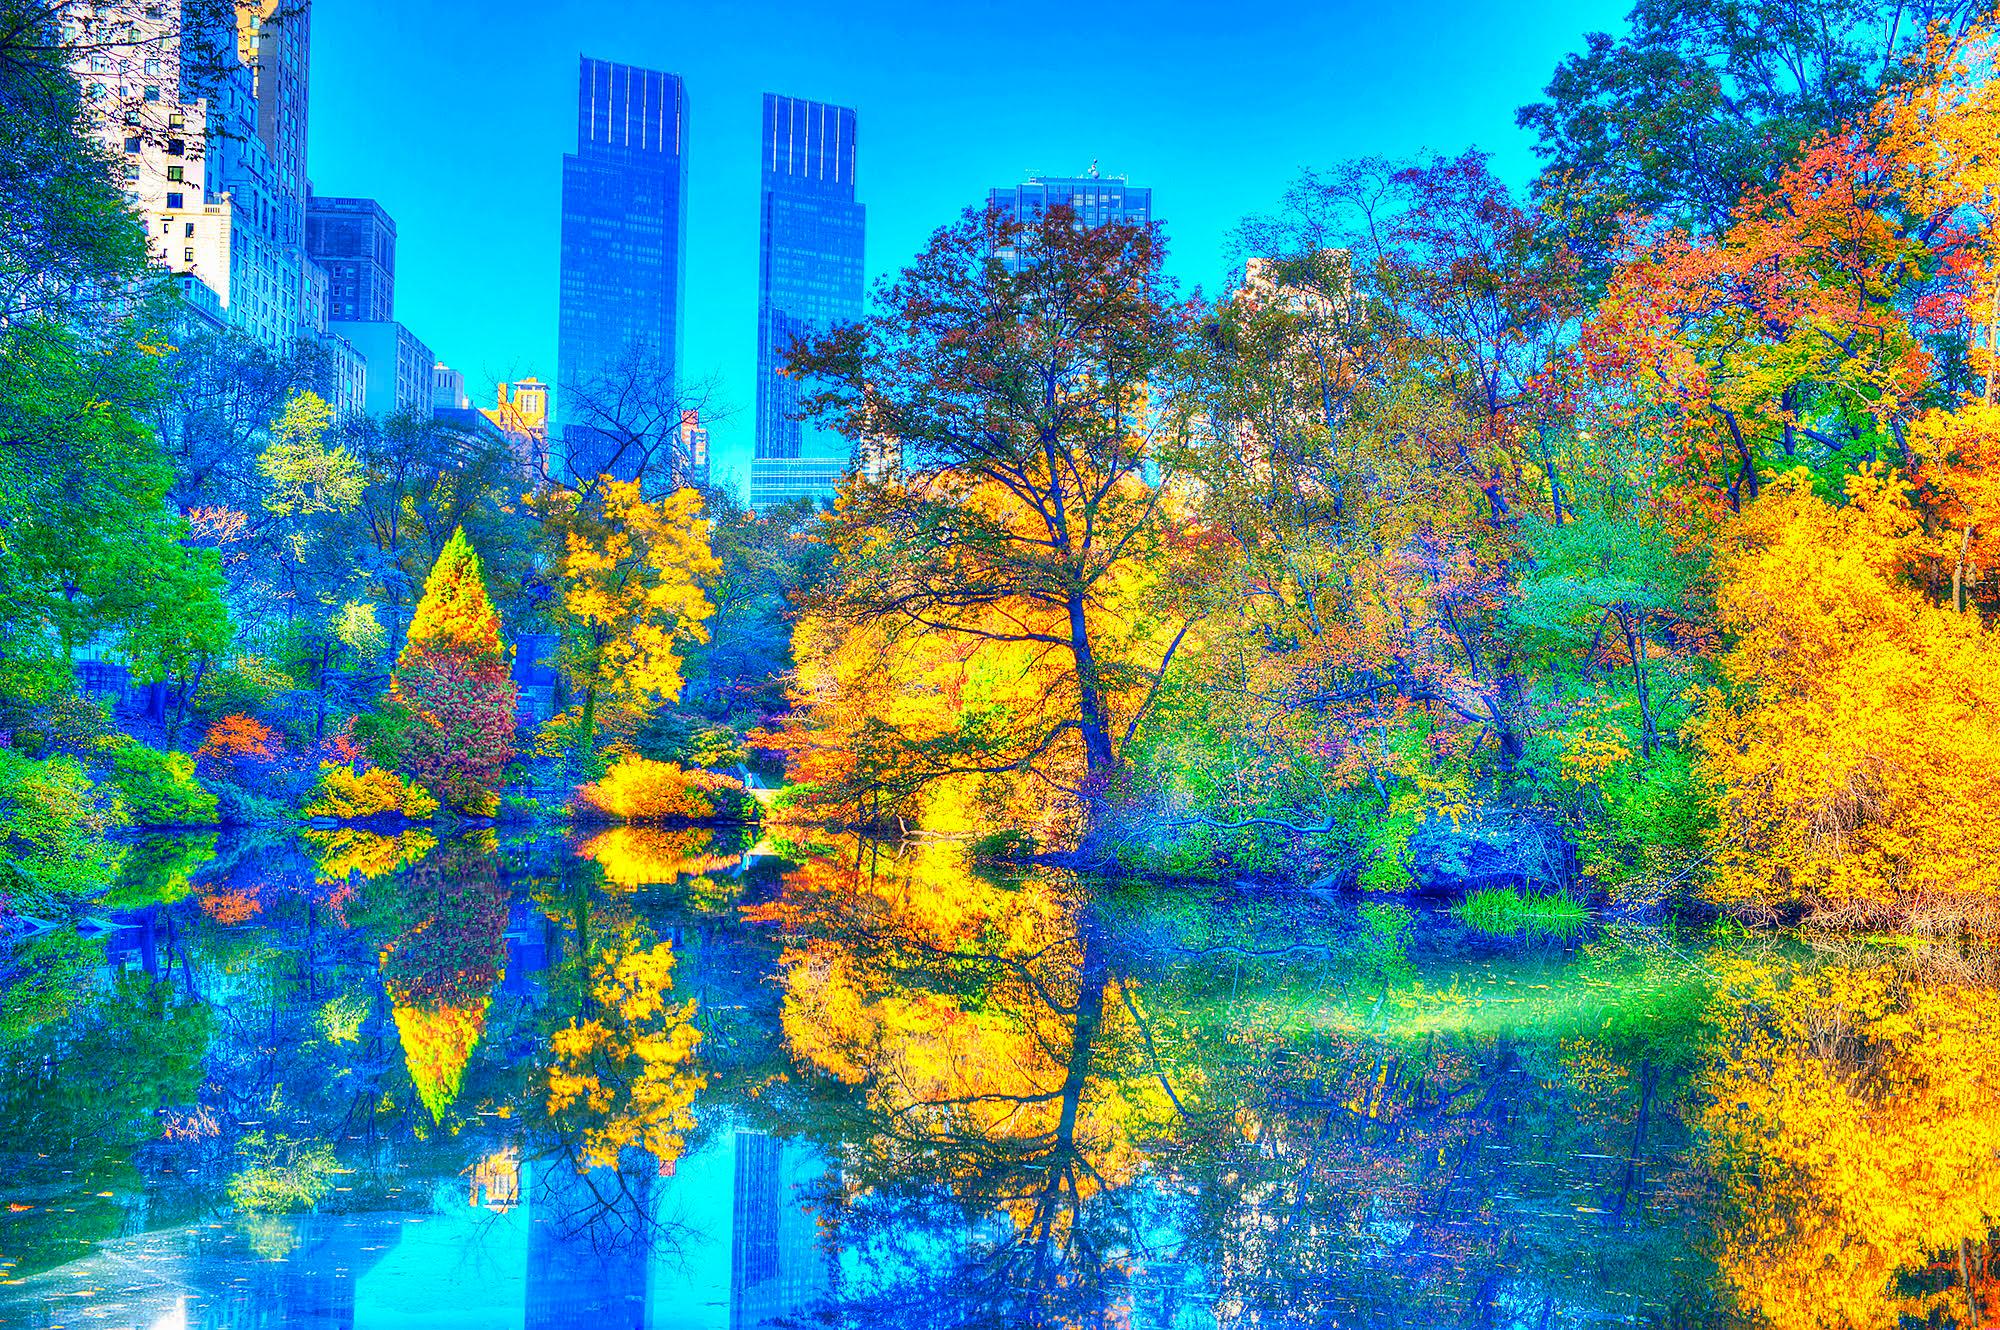 Mitchell Funk Landscape Photograph - Autumn in Central Park with Fall Foliage